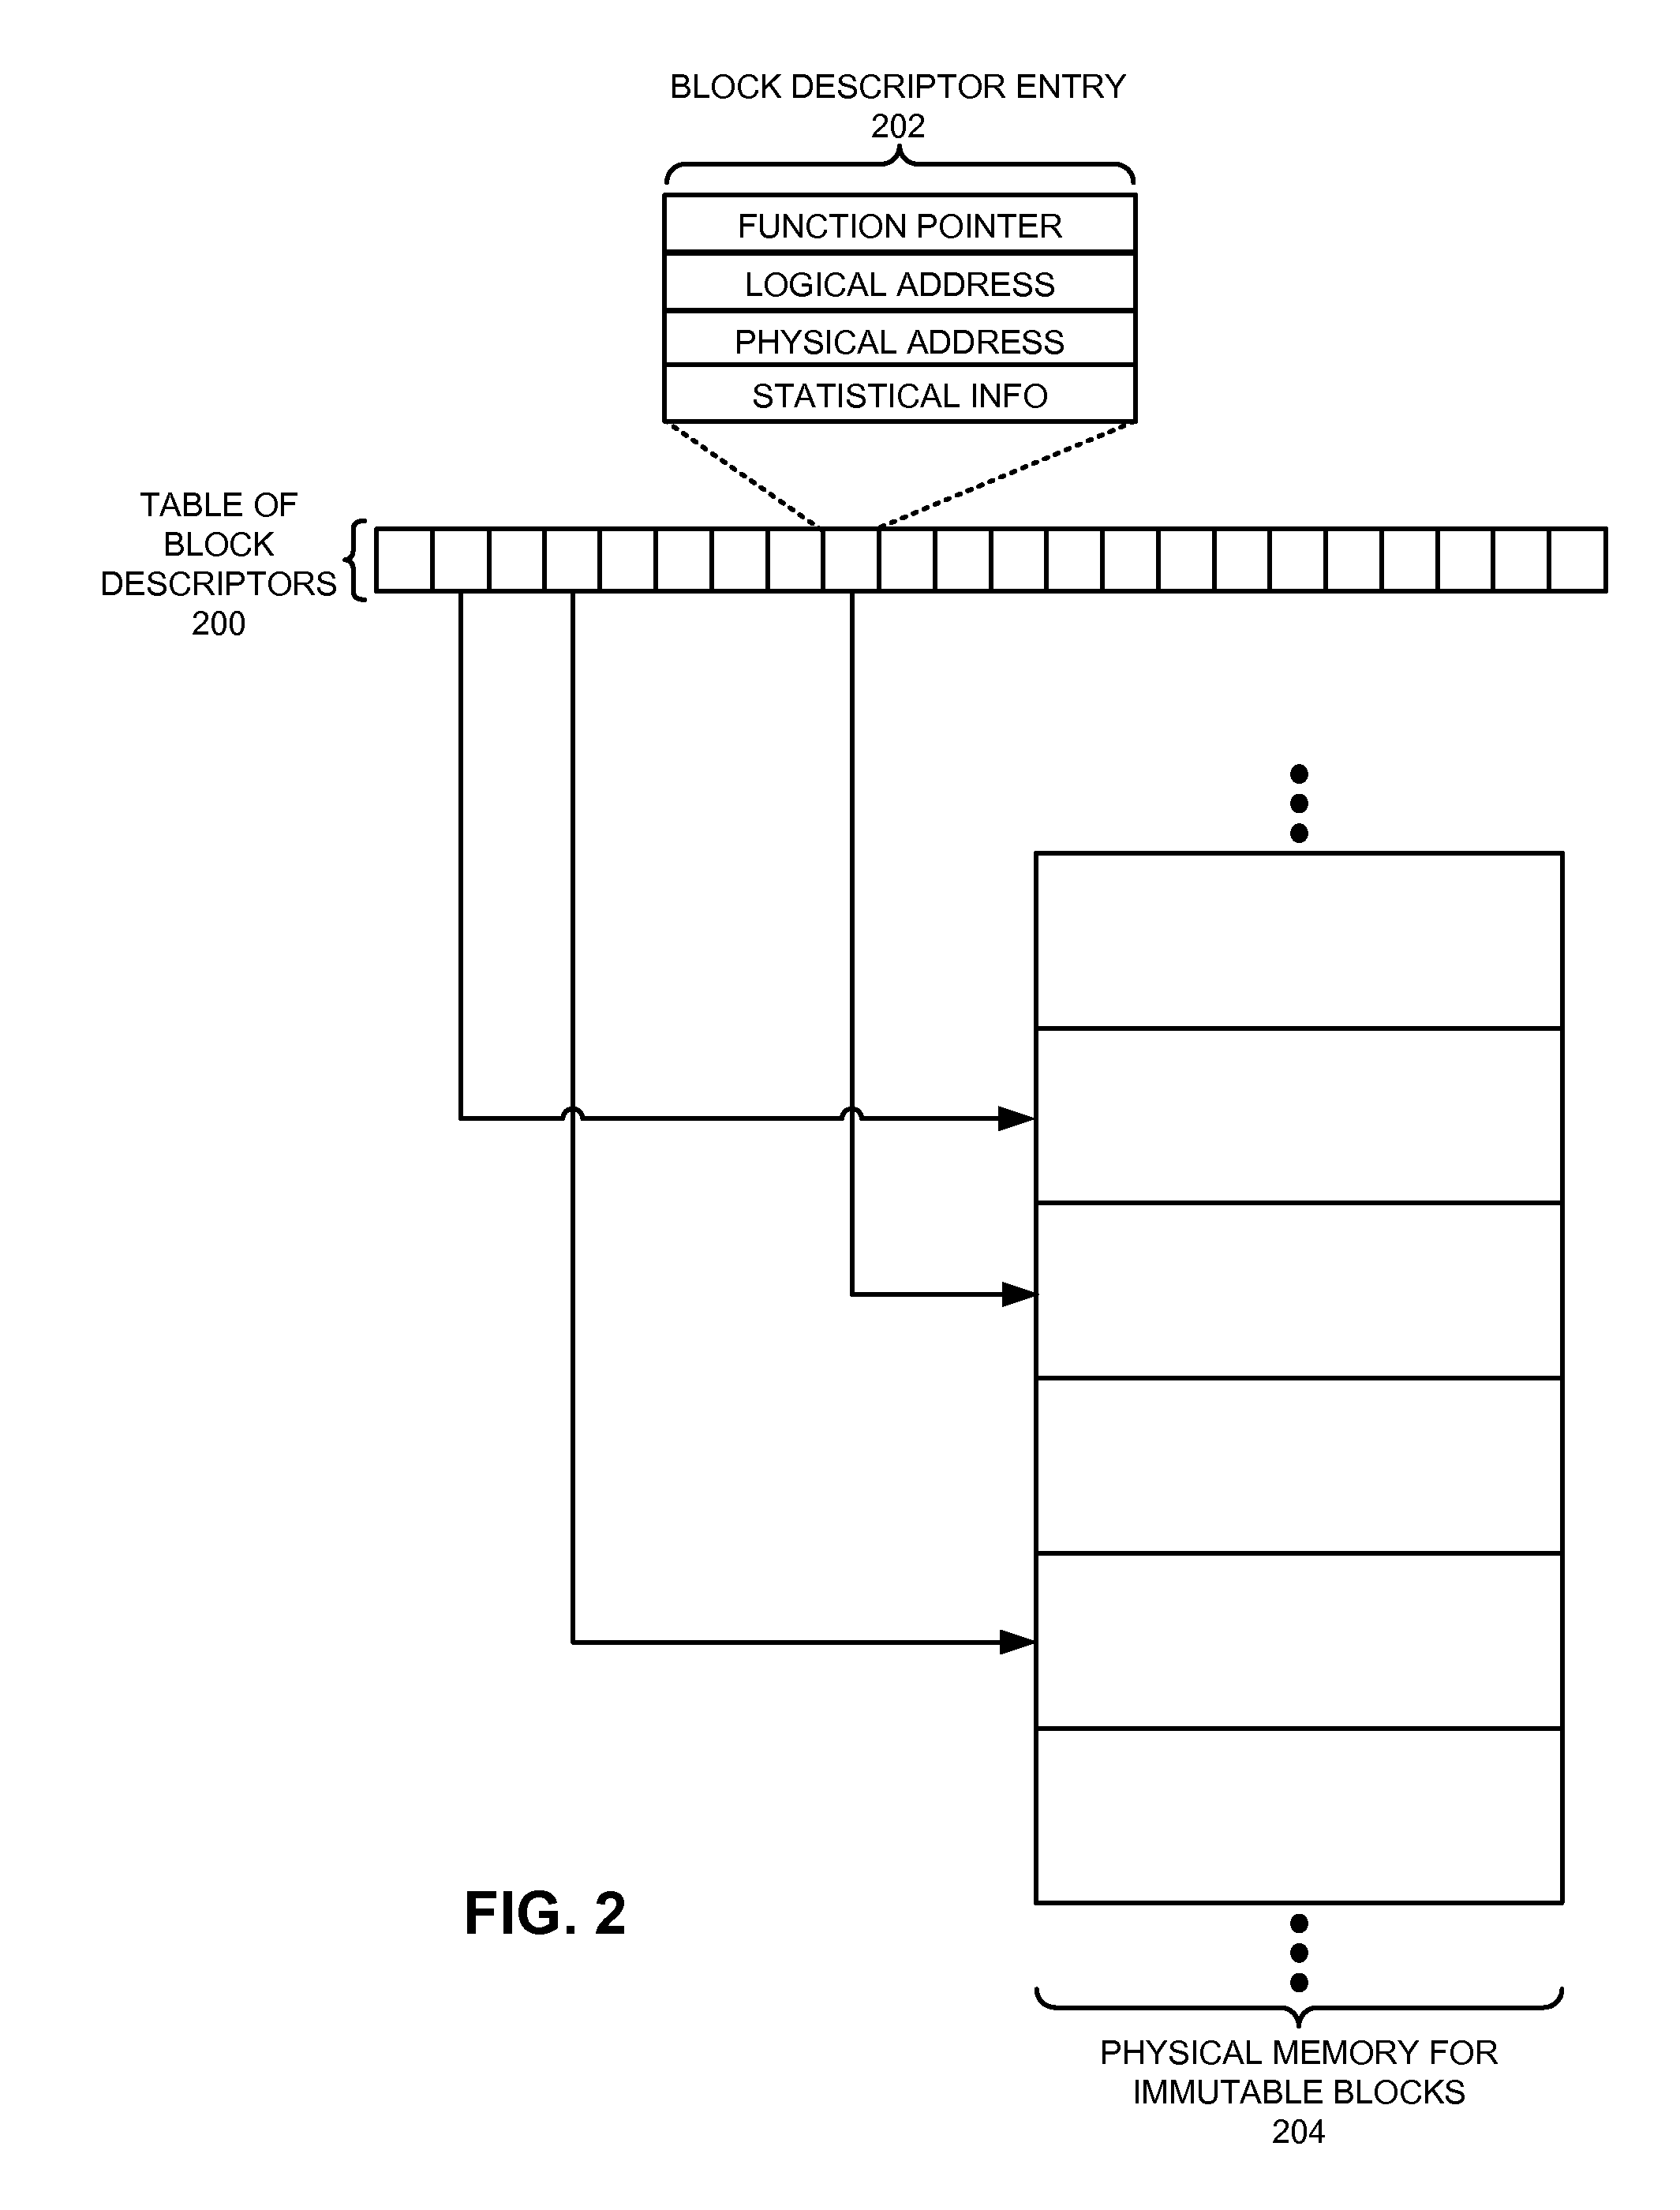 Method and apparatus for allocating memory for immutable data on a computing device